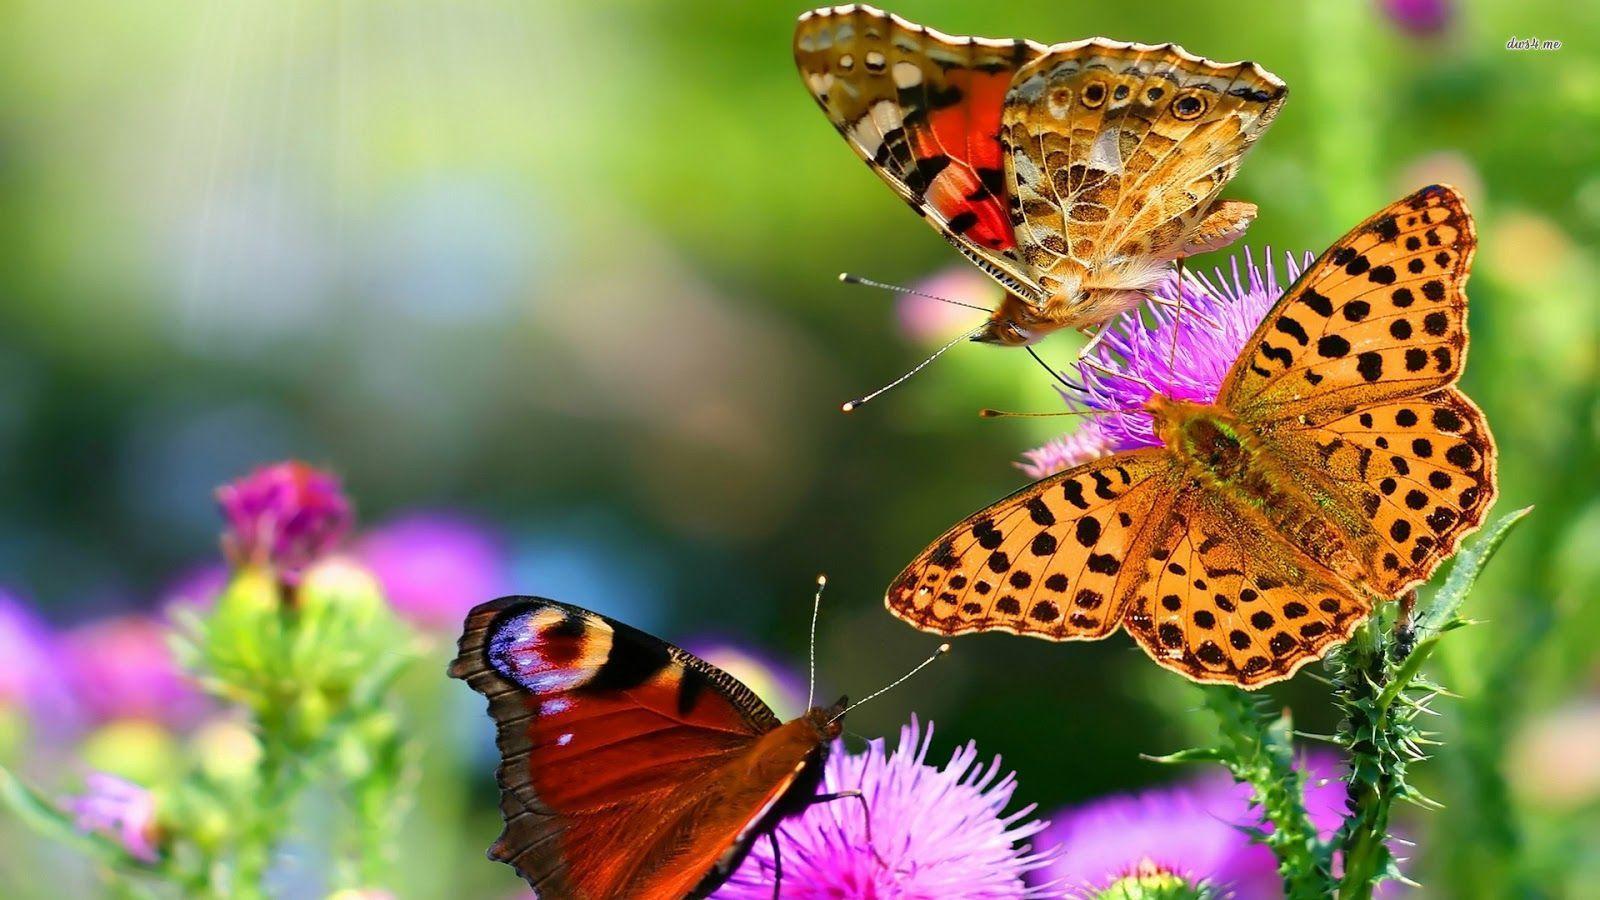 Beatiful Butterfly HD Wallpaper Free Download For Android. Free